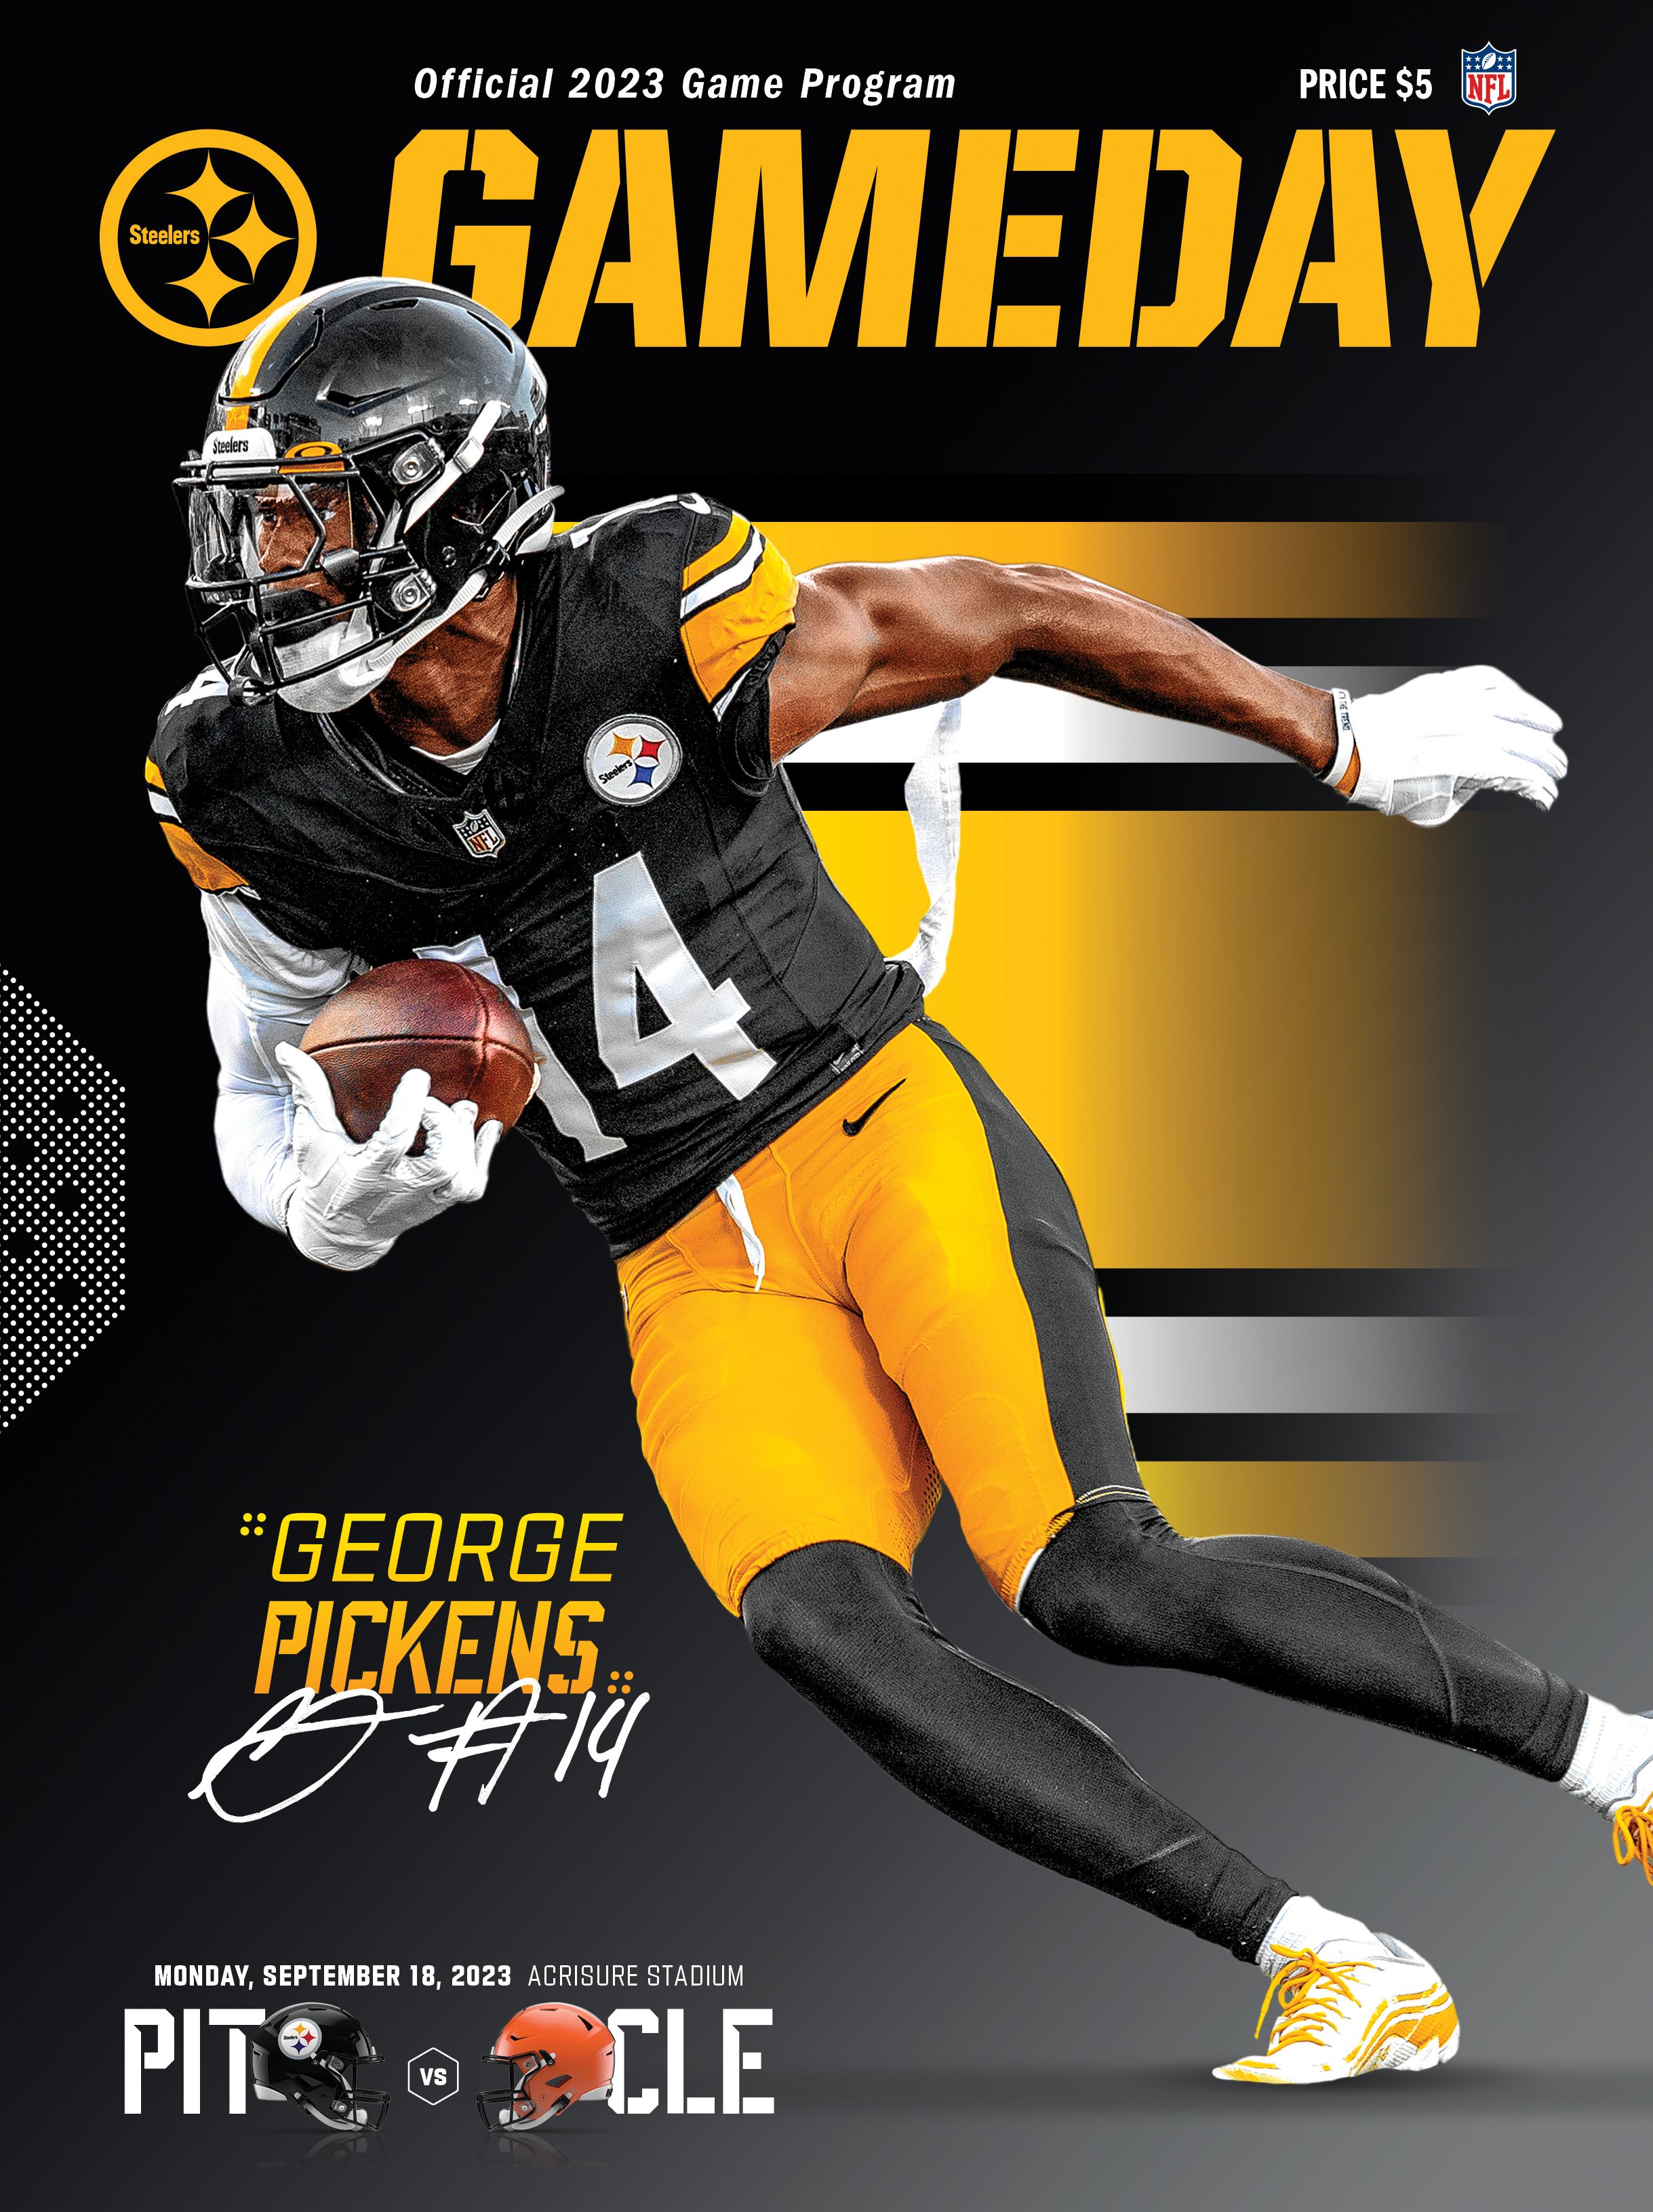 steelers game day jerseys